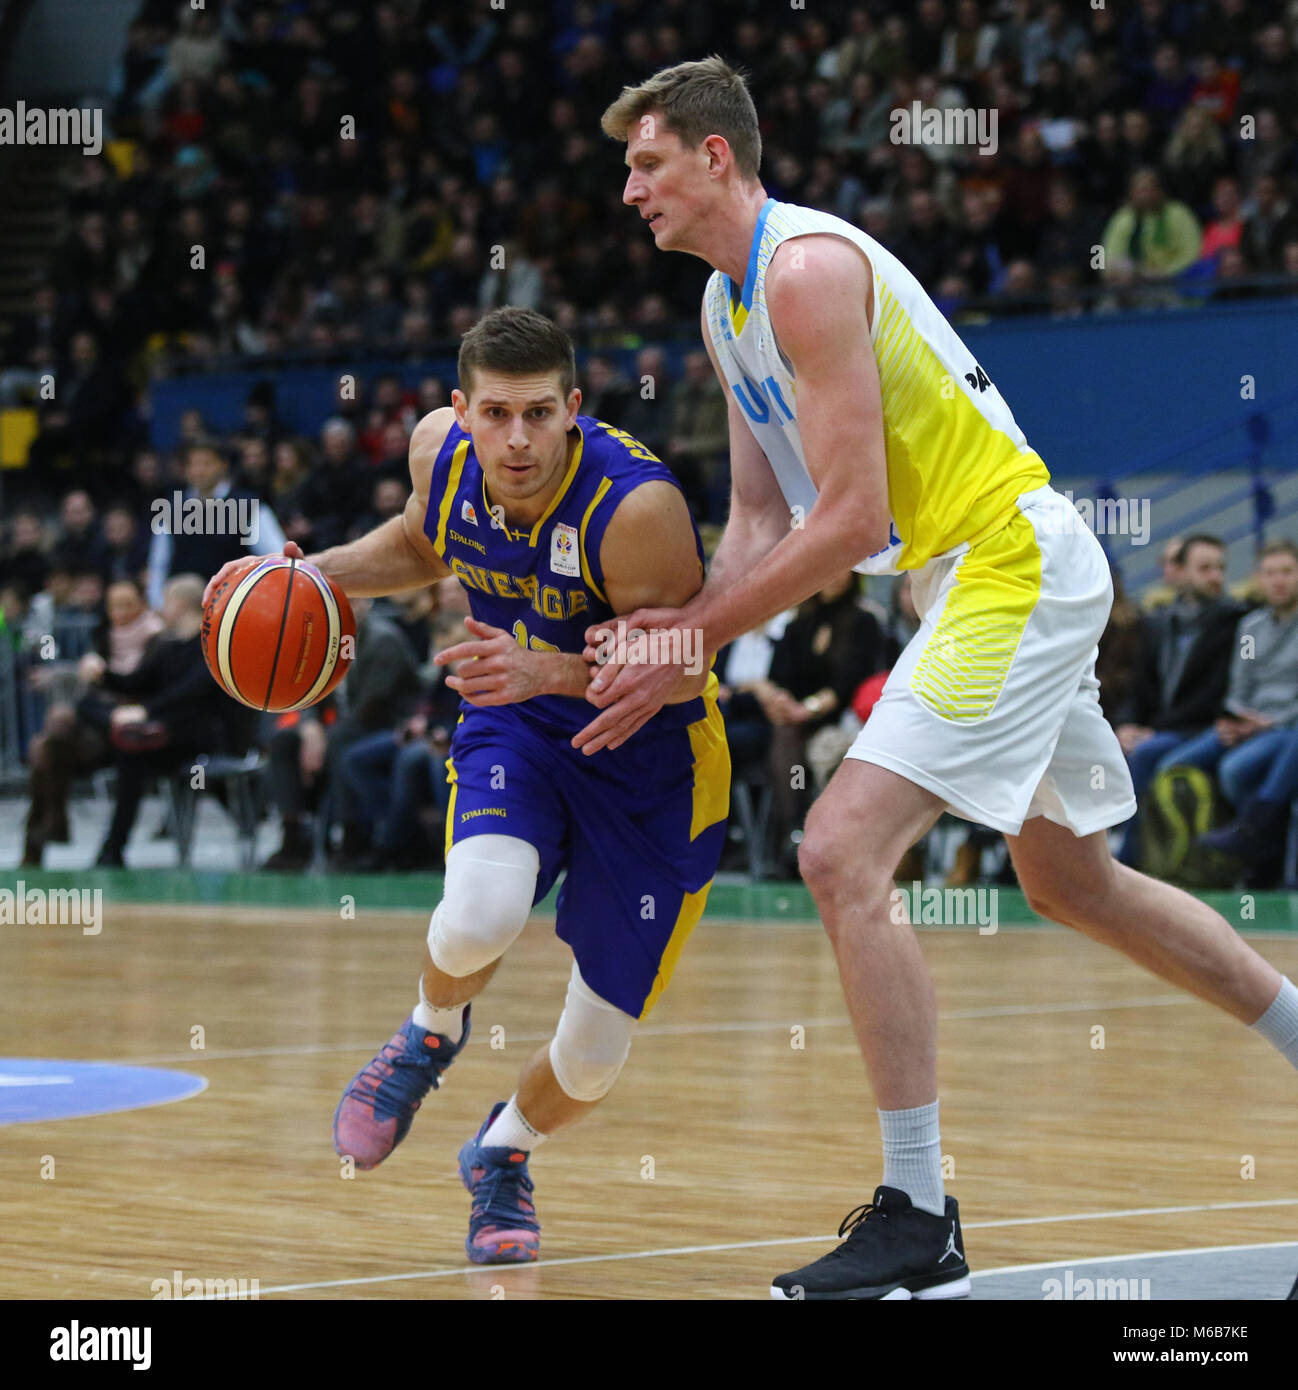 KYIV, UKRAINE - FEBRUARY 26, 2018: Christopher CZERAPOWICZ of Sweden (L) and Artem PUSTOVYI of Ukraine in action during their FIBA World Cup 2019 Euro Stock Photo